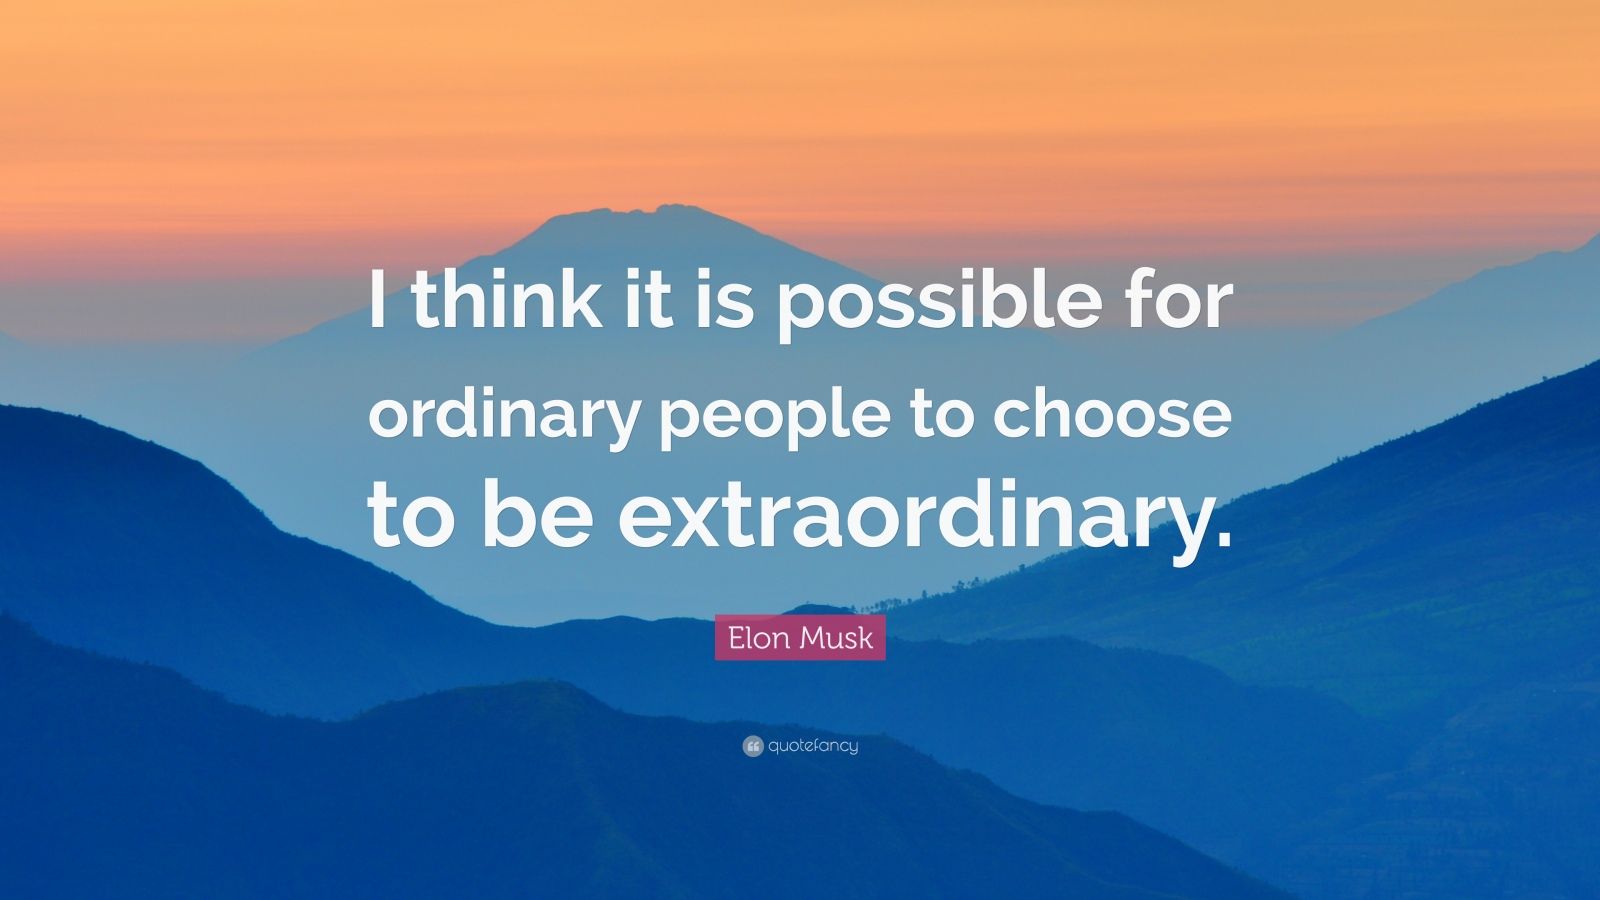 Elon Musk Quote: “I think it is possible for ordinary people to choose ...